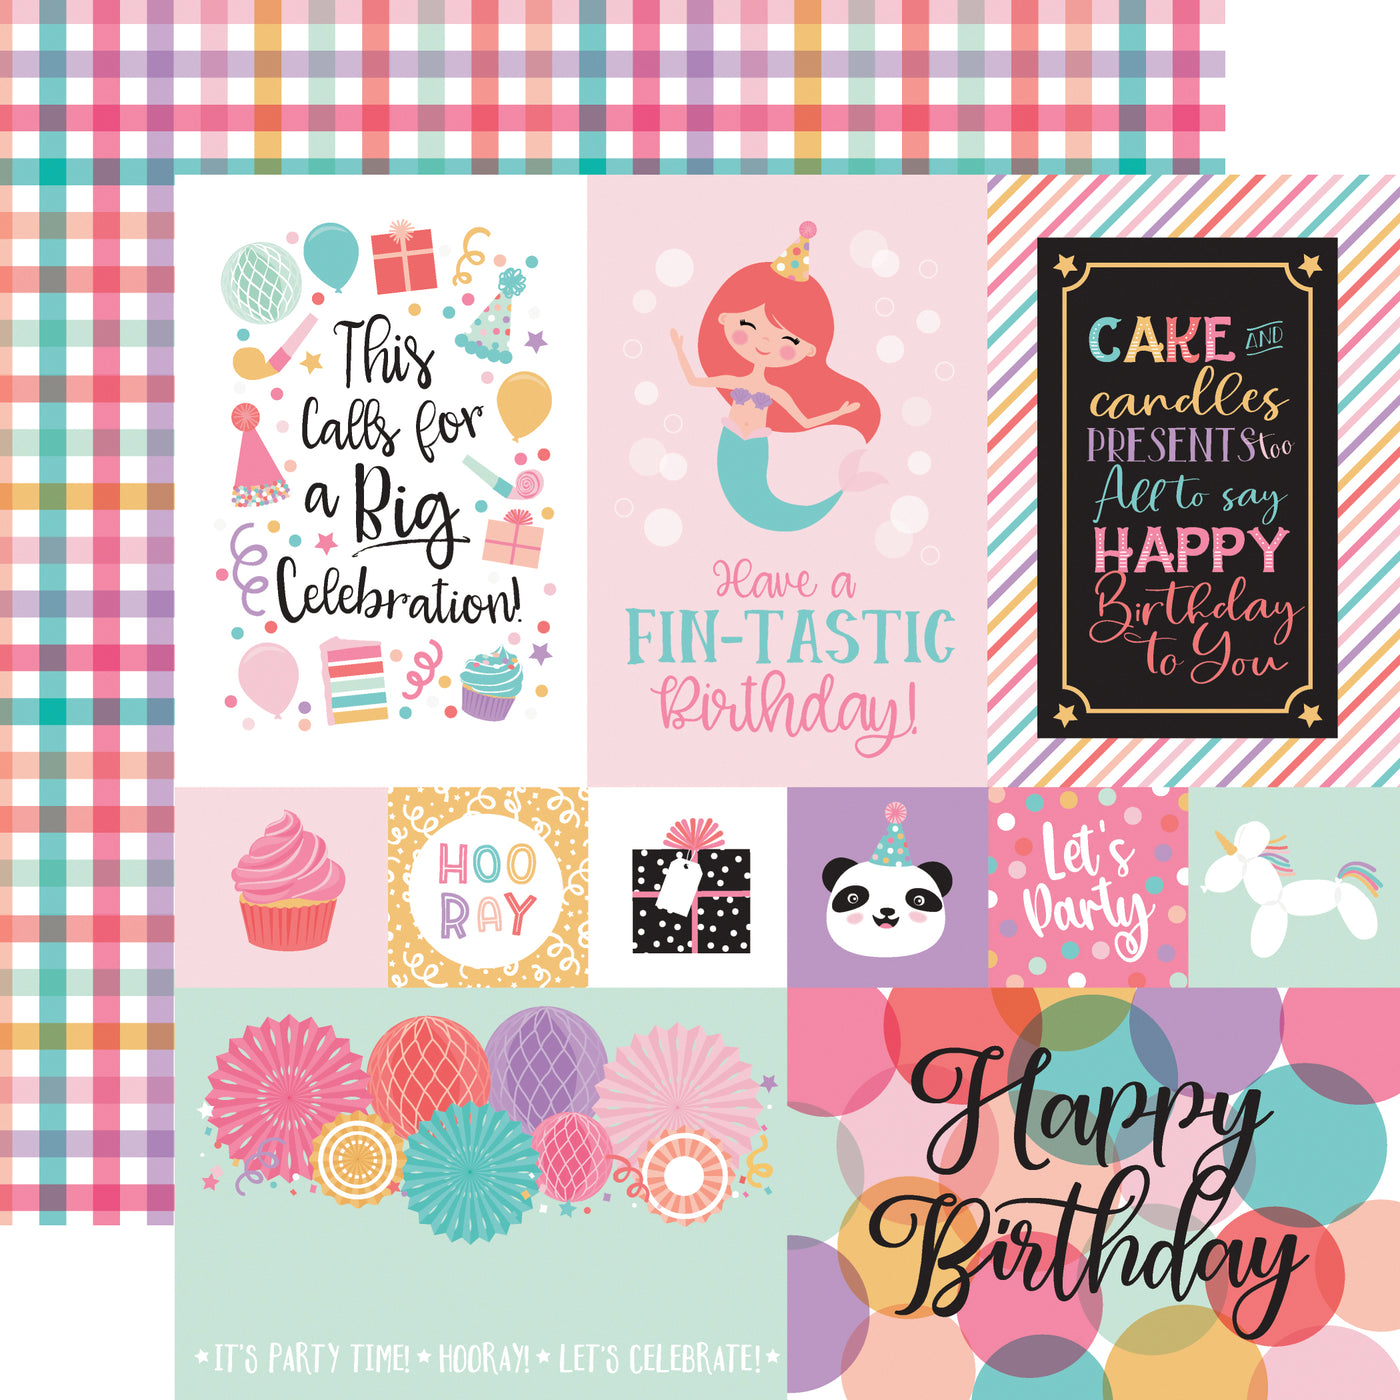 IT'S YOUR BIRTHDAY GIRL 12x12 Collection Kit - Echo Park